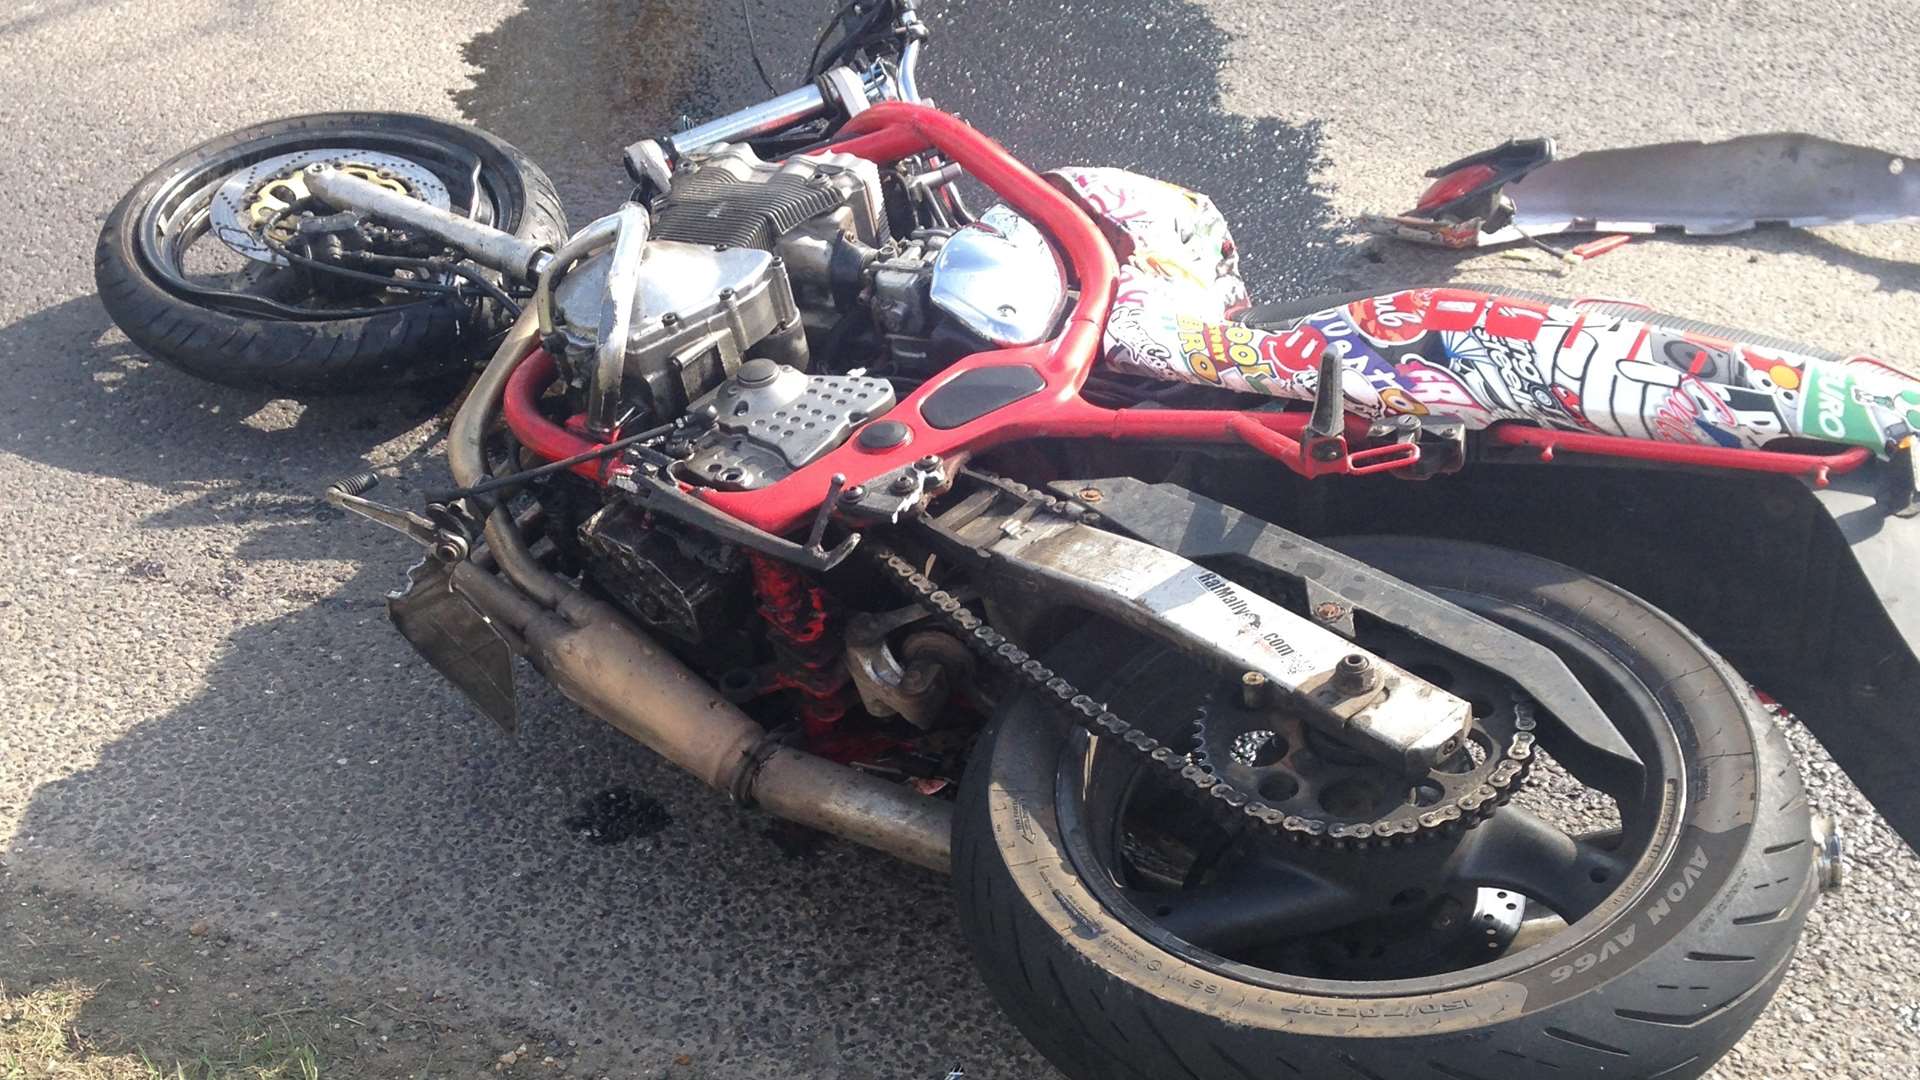 The motorcycle was involved in a head-on crash in Appledore